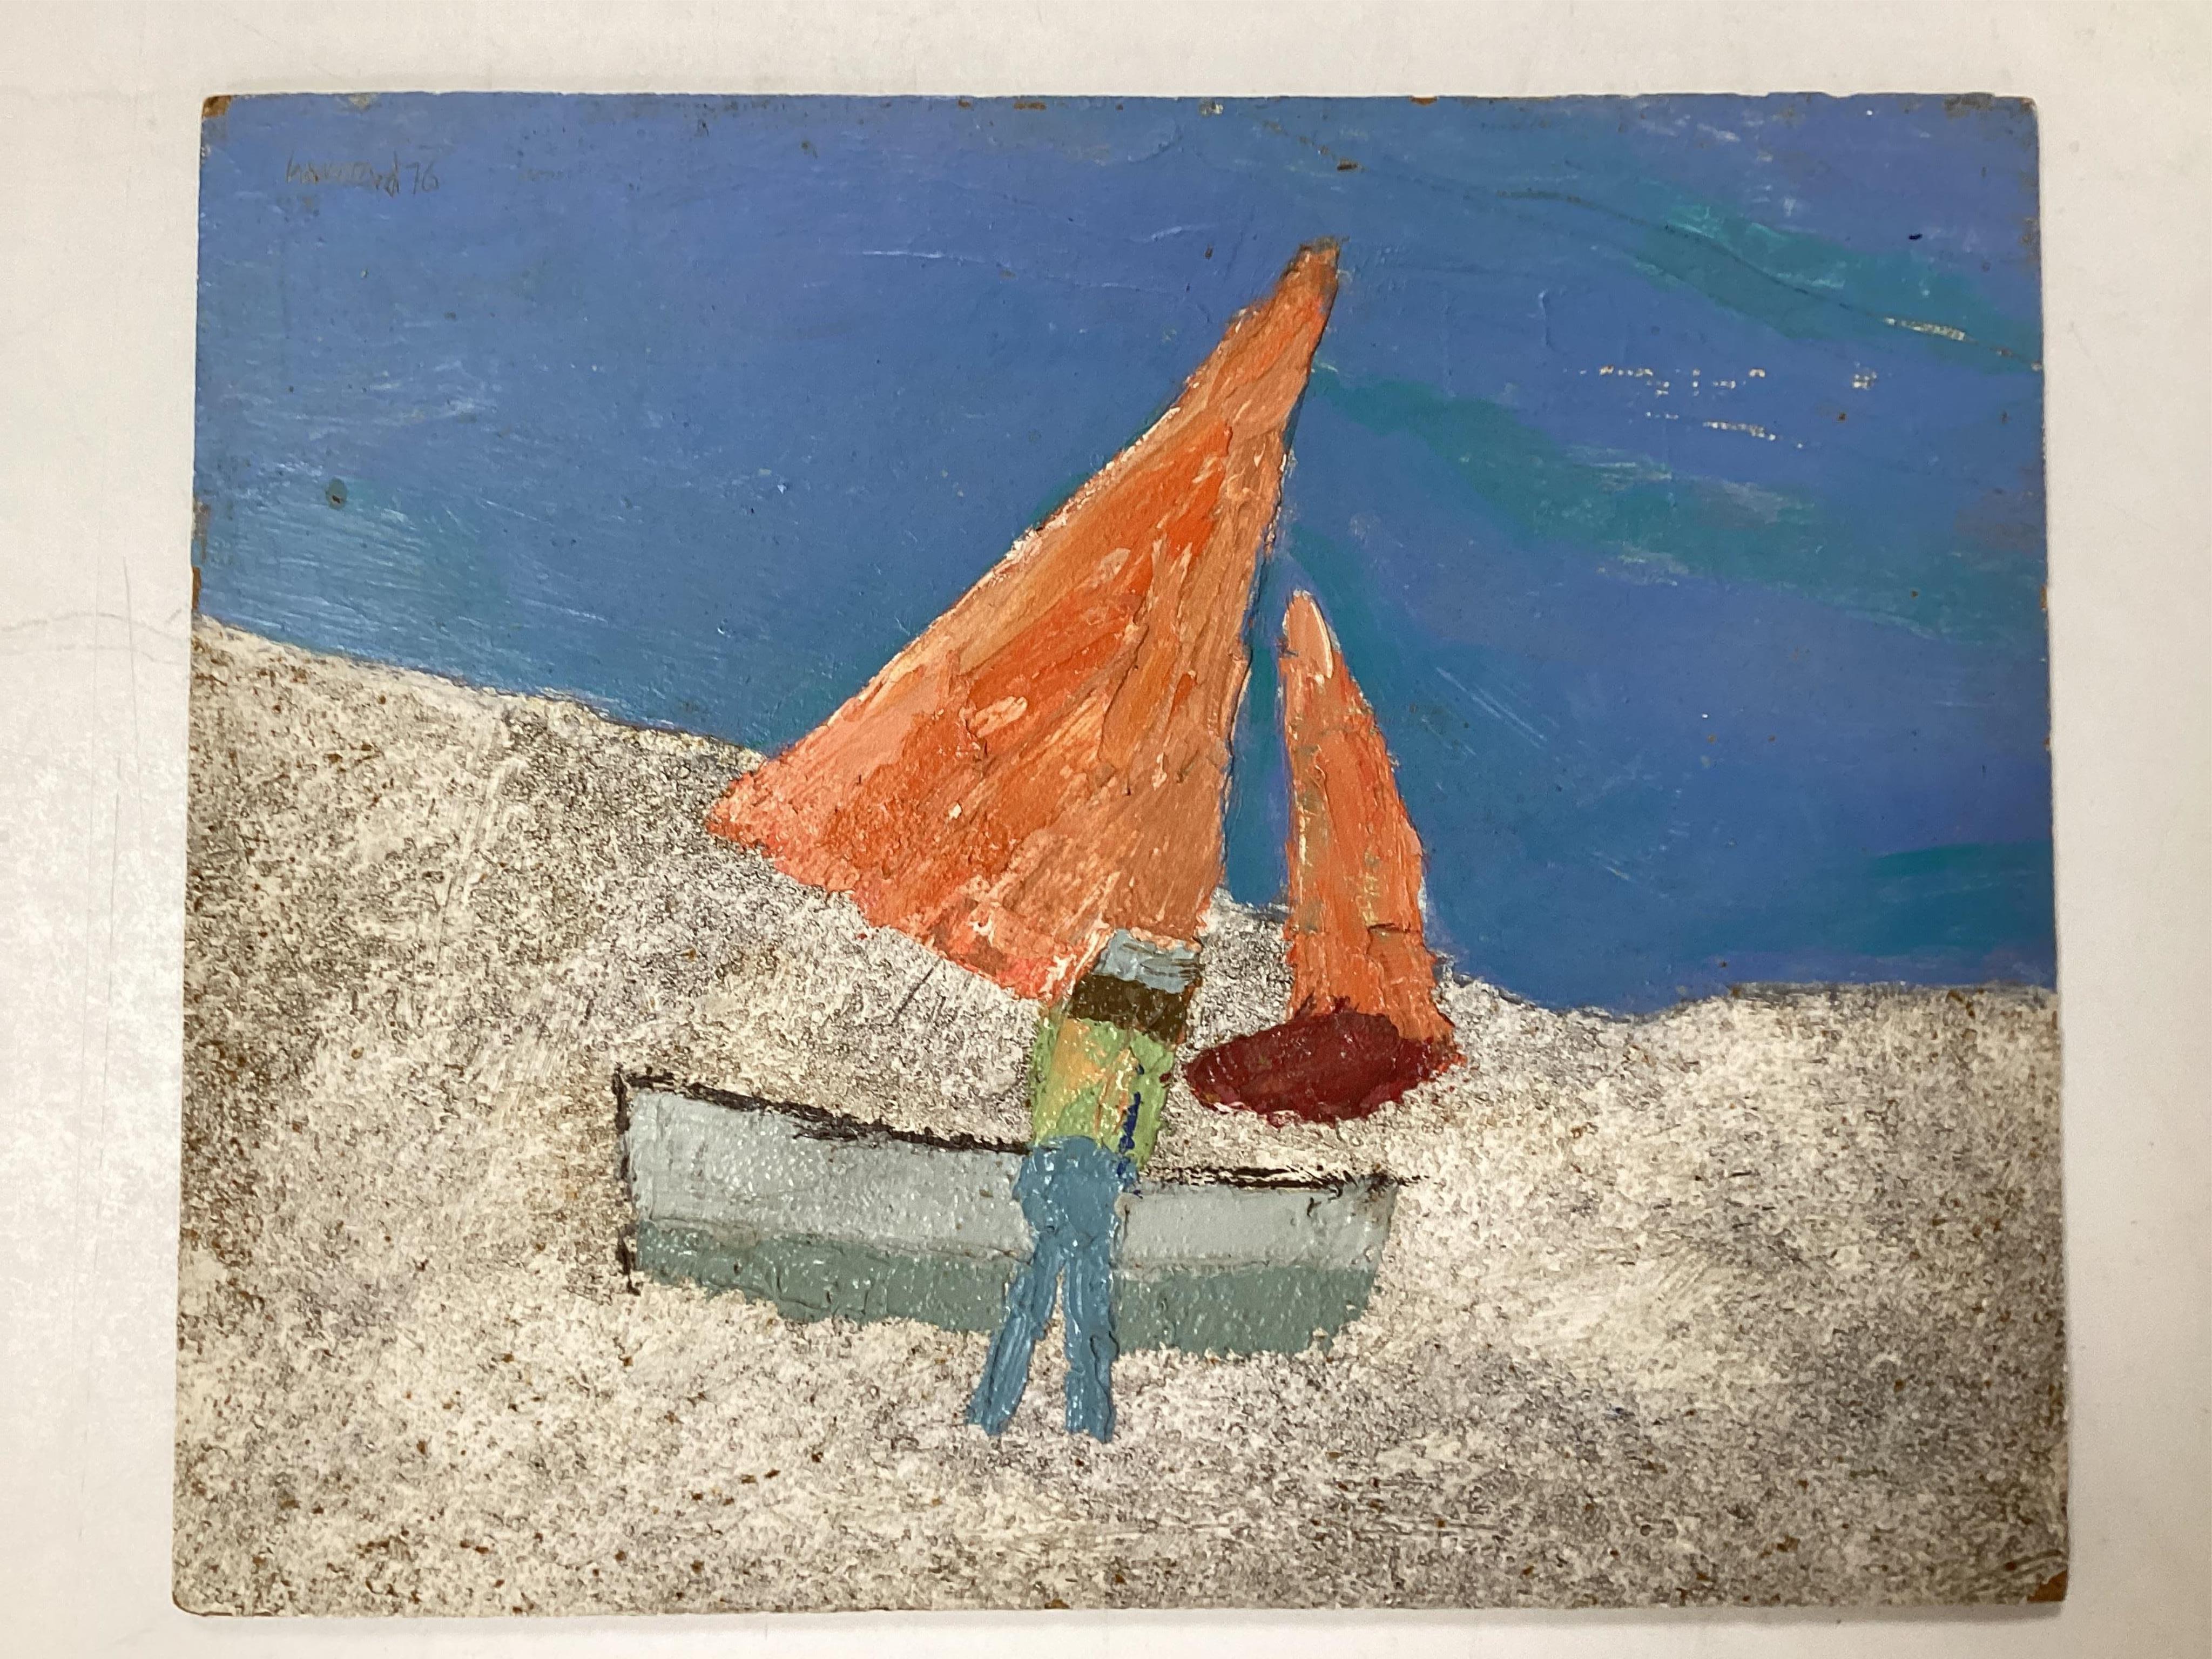 From the Studio of Fred Cuming. Modern British, Impasto oil on board, abstract composition, Man with sailing dinghy, unsigned, 22 x 27cm, unframed. Condition - fair, some minor chipping and surface dirt